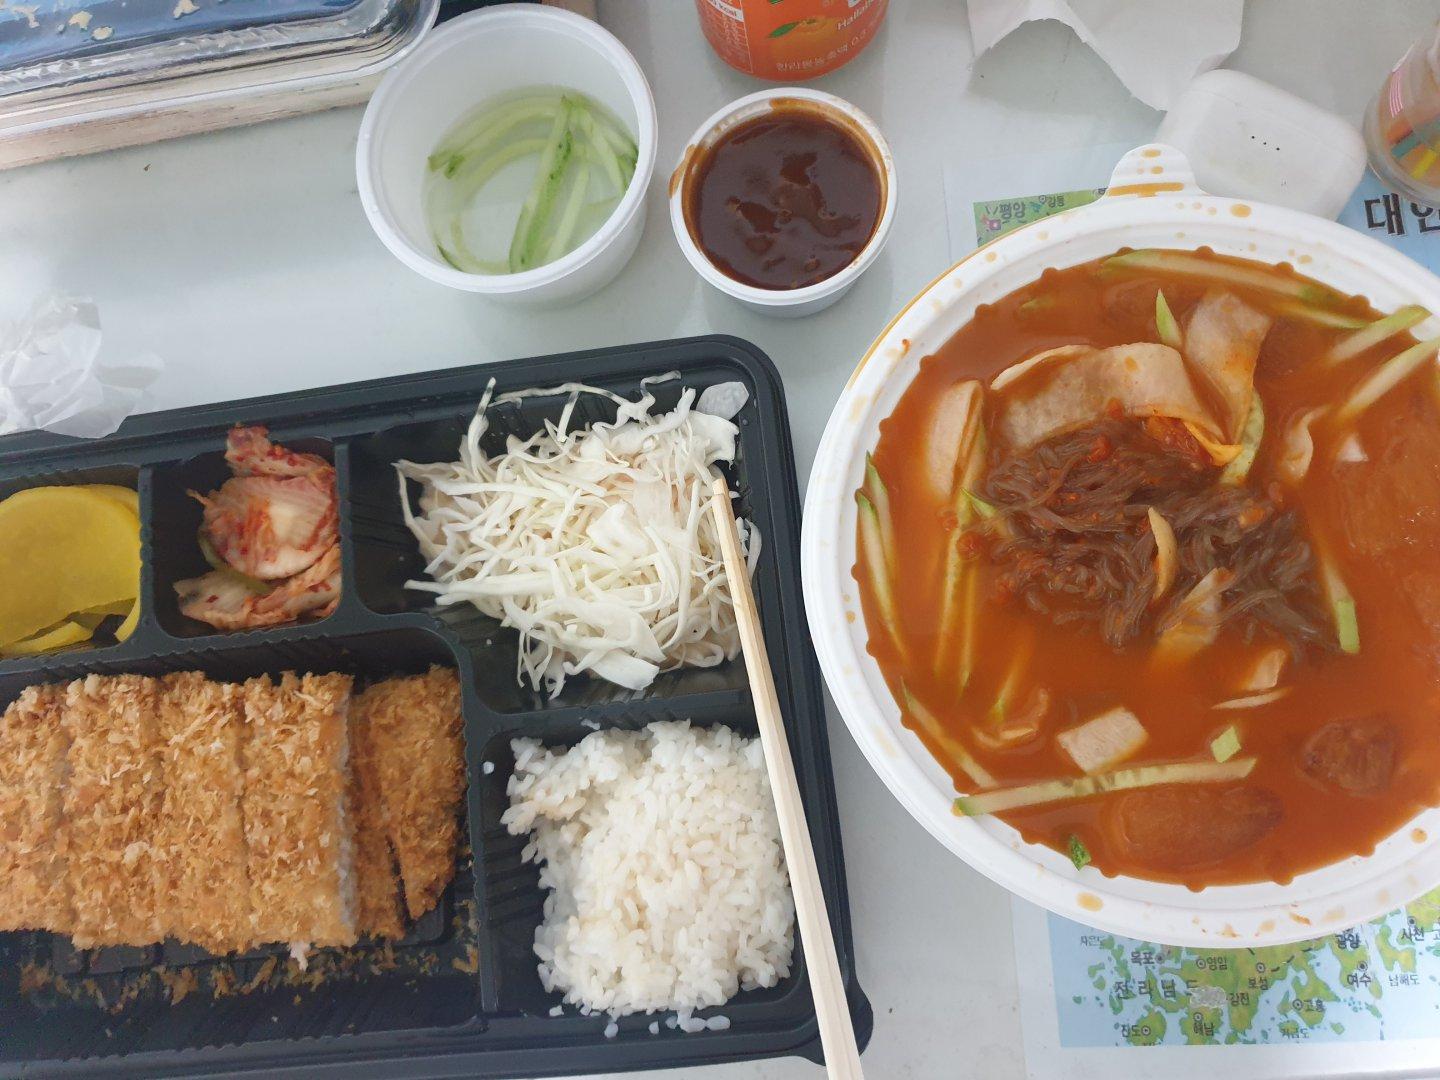 How about a 10,000 won combination of cold noodles and pork cutlet